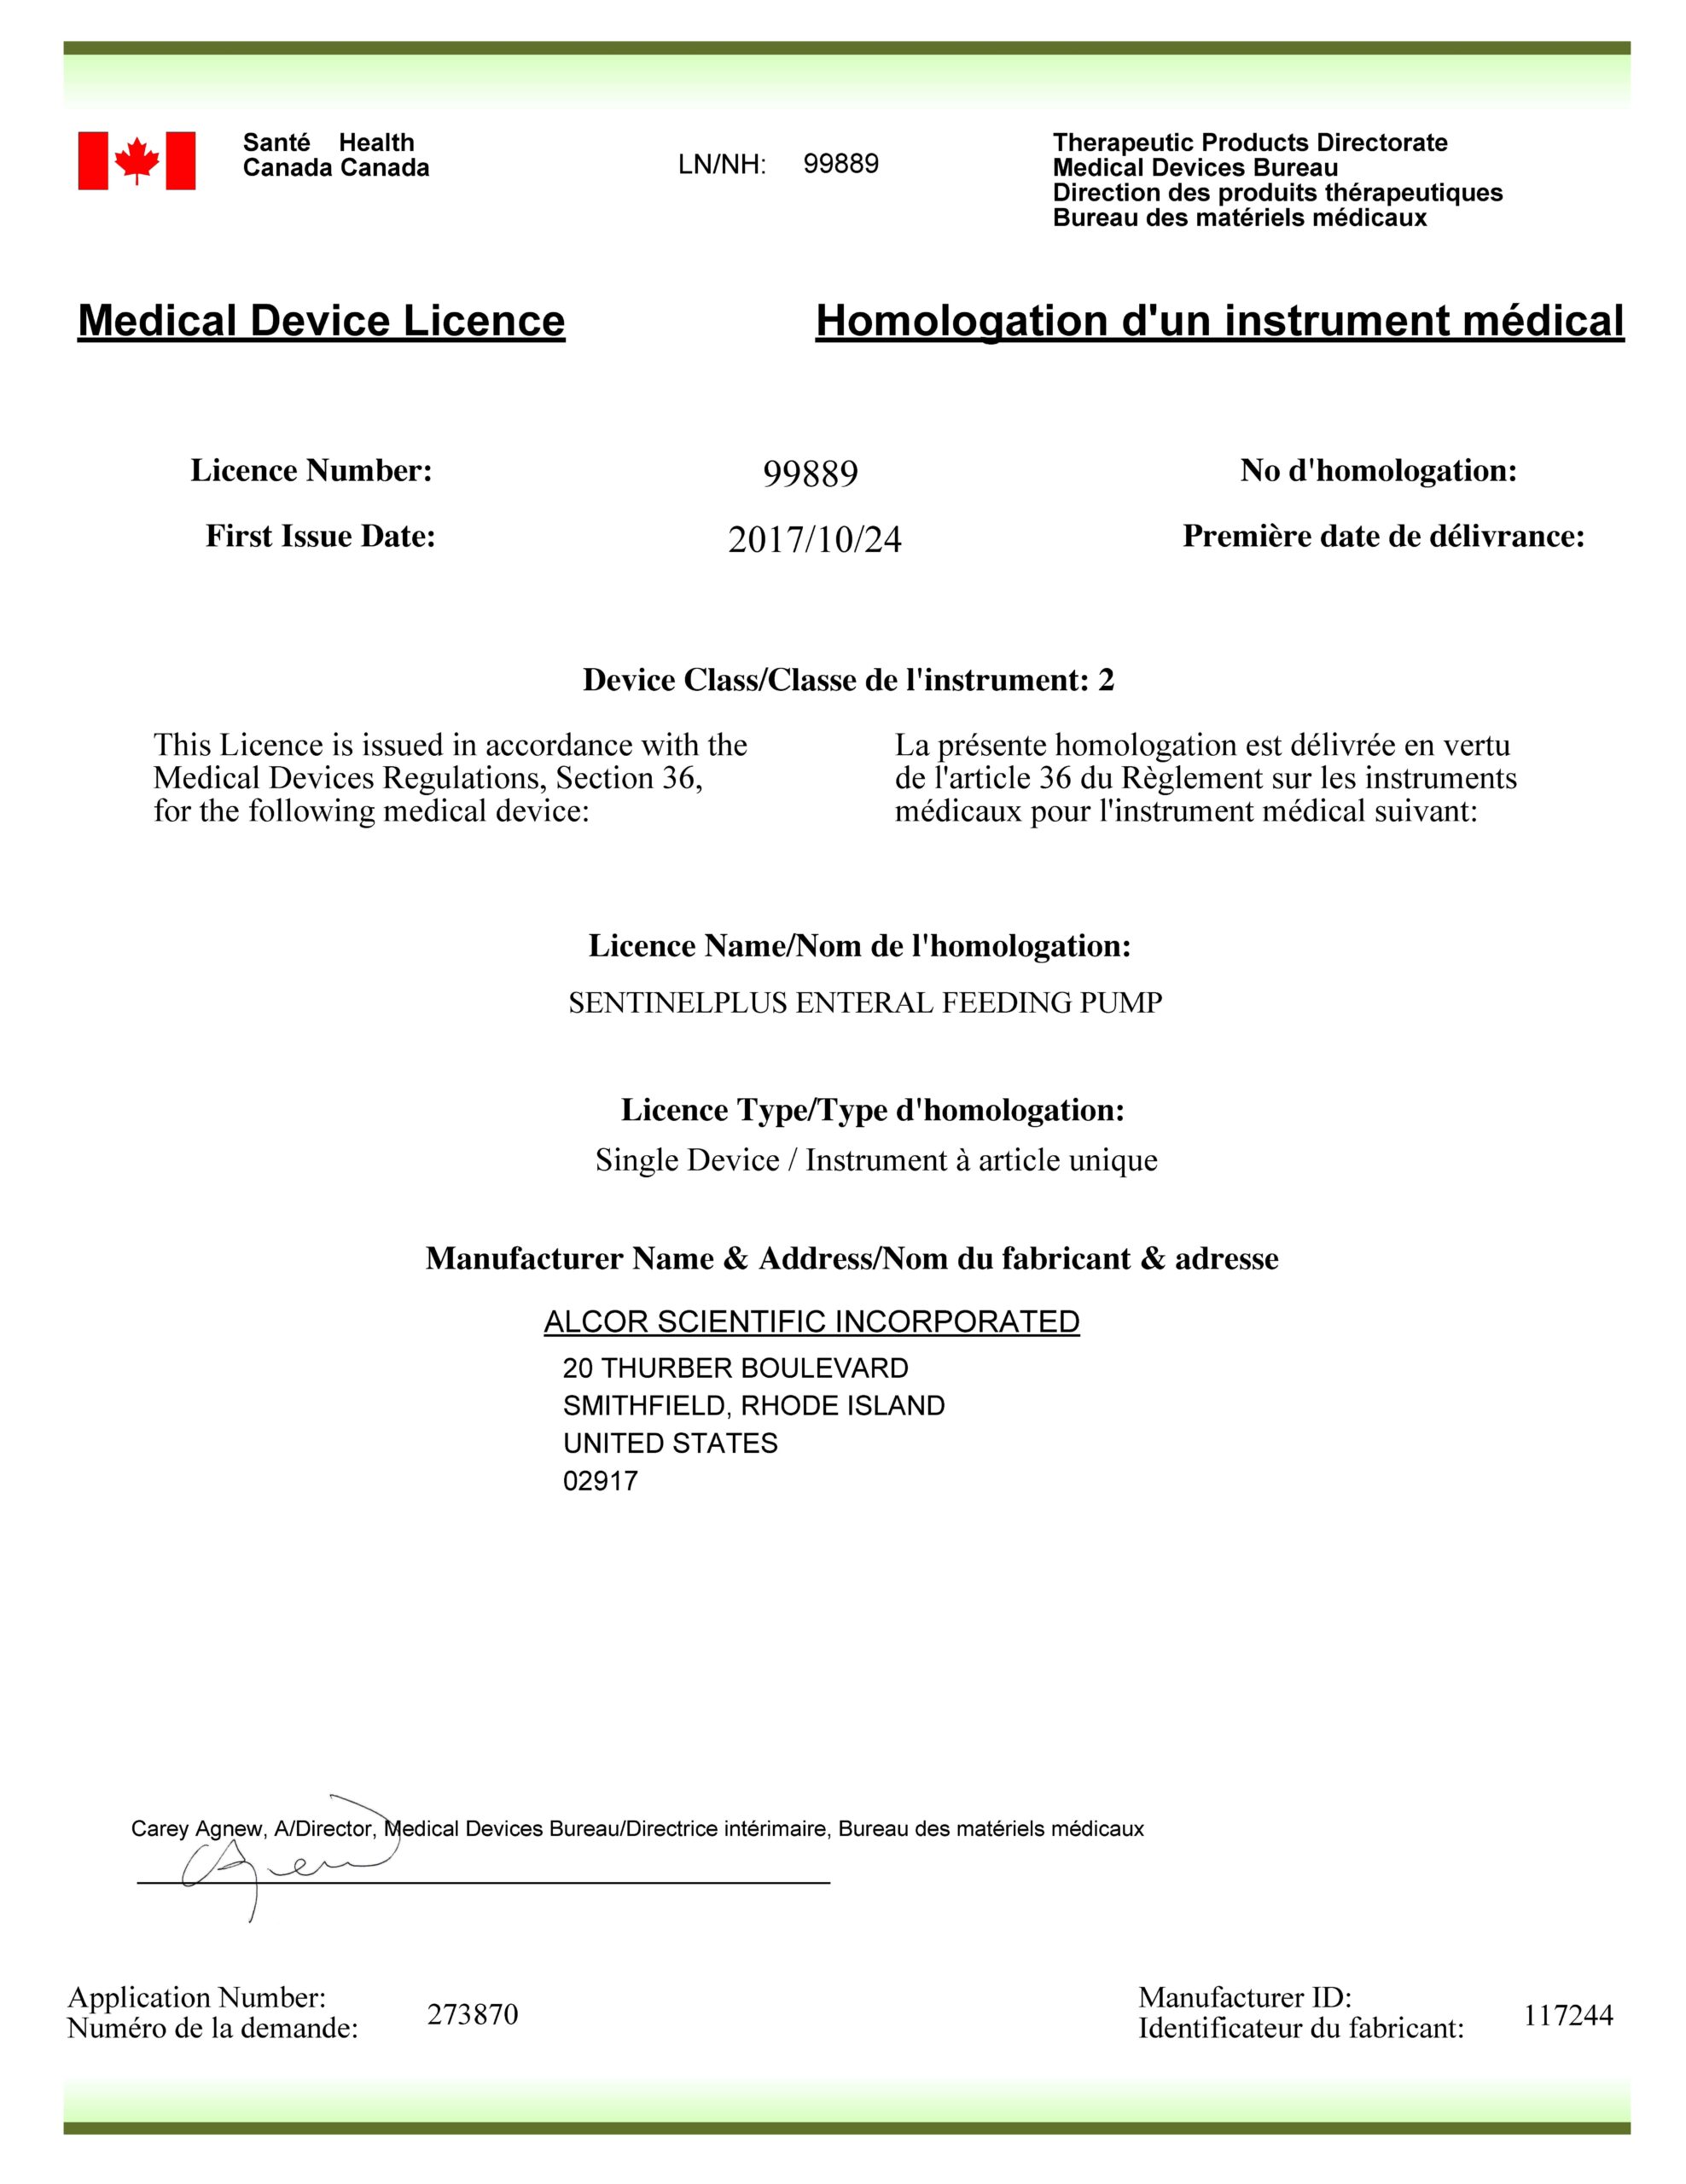 Copy of the Medical Device License 99889 issued for the ALCOR Sentinel Plus Enteral Feeding Pump device.